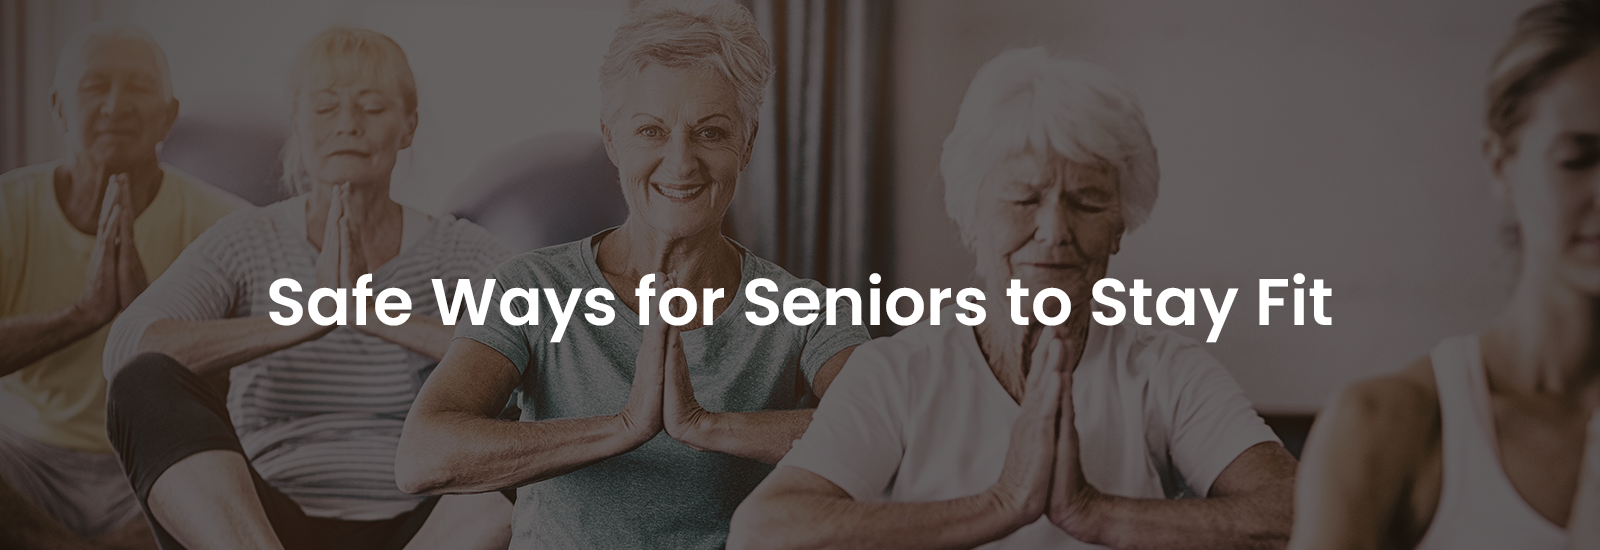 Safe Ways for Seniors to Stay Fit | Banner Image